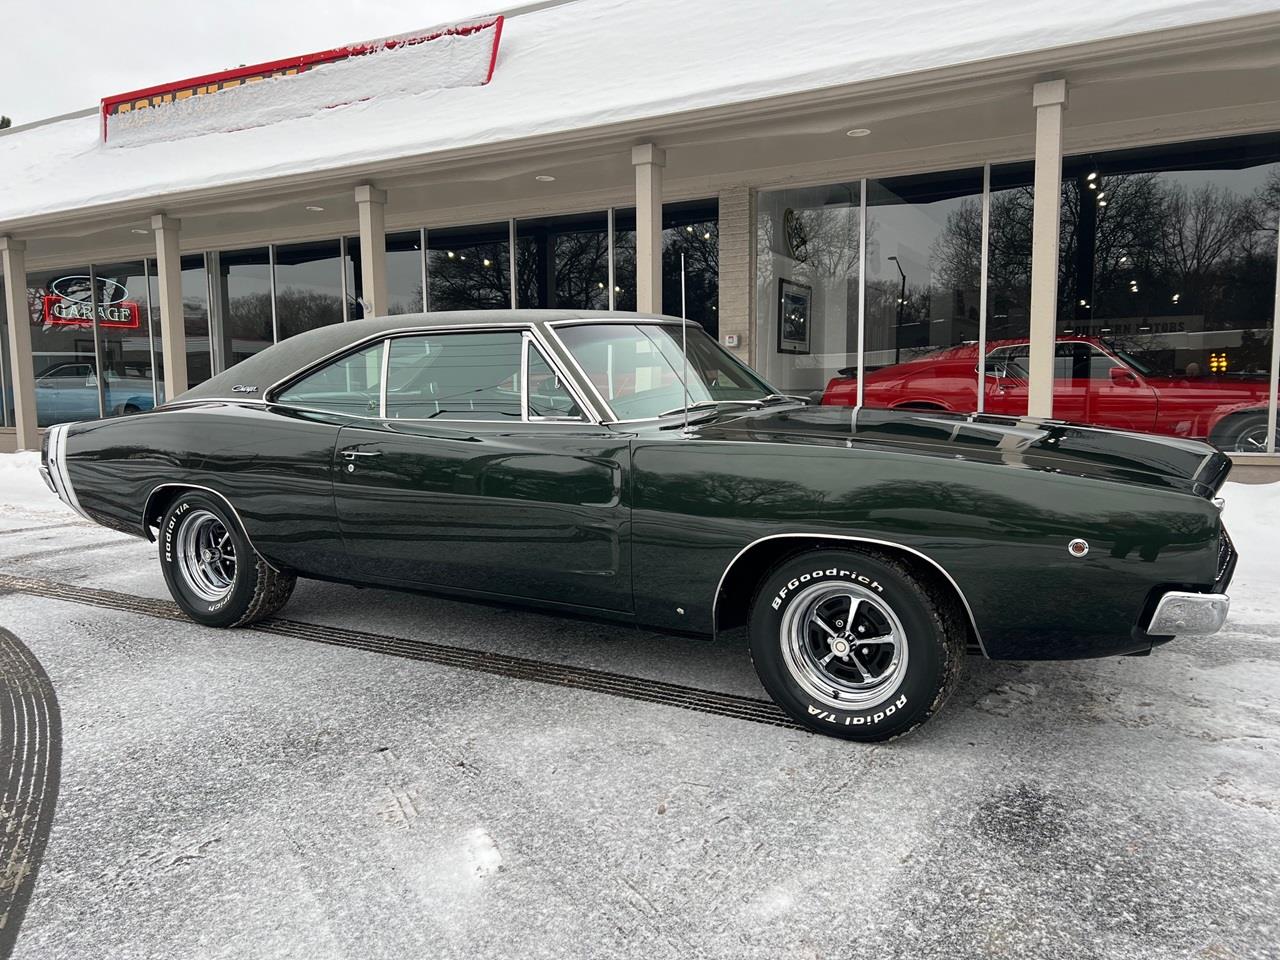 For Sale: 1968 Dodge Charger R/T in Clarkston, Michigan for sale in Clarkston, MI